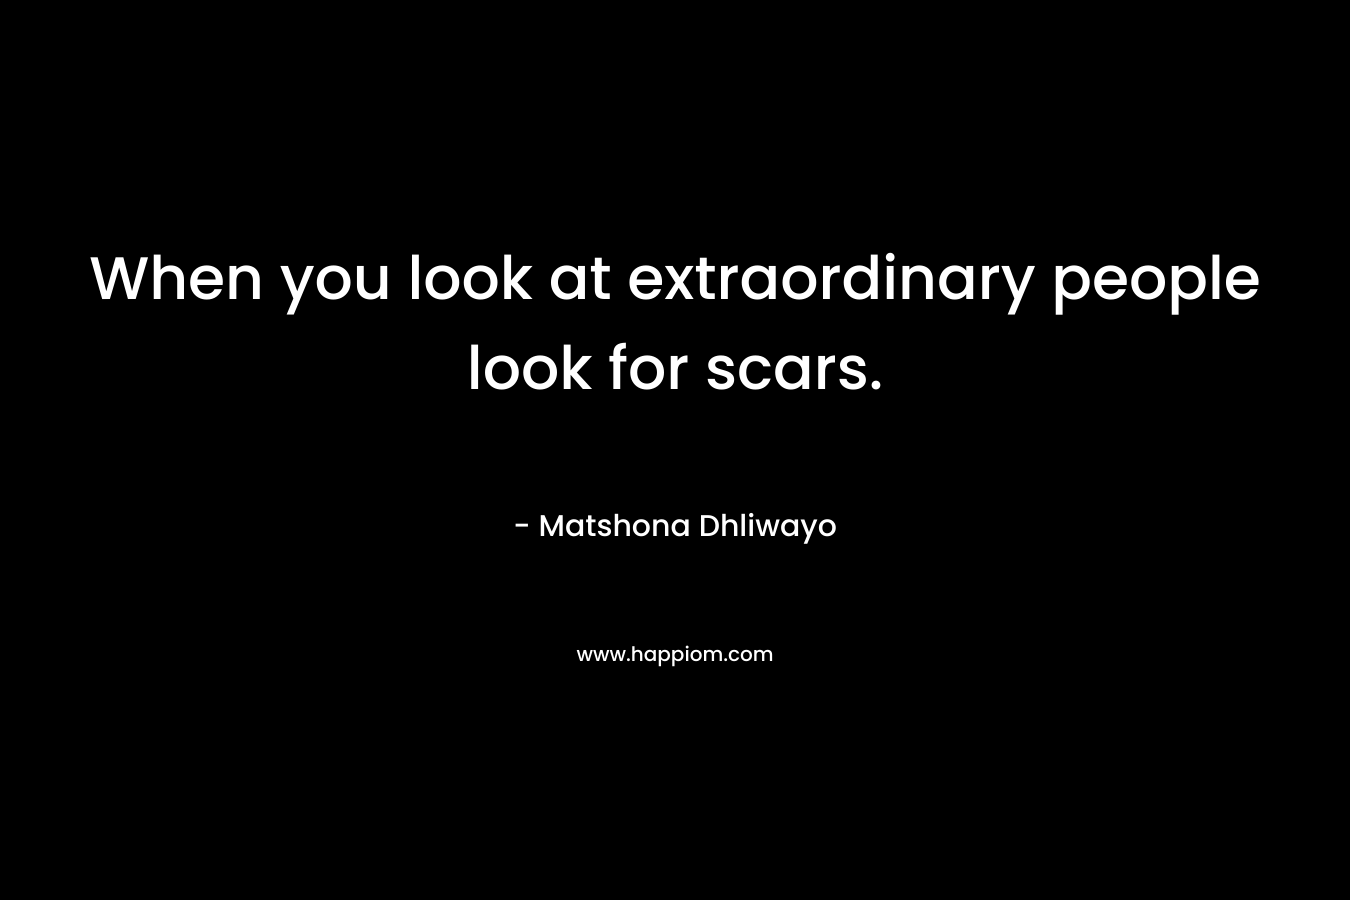 When you look at extraordinary people look for scars.